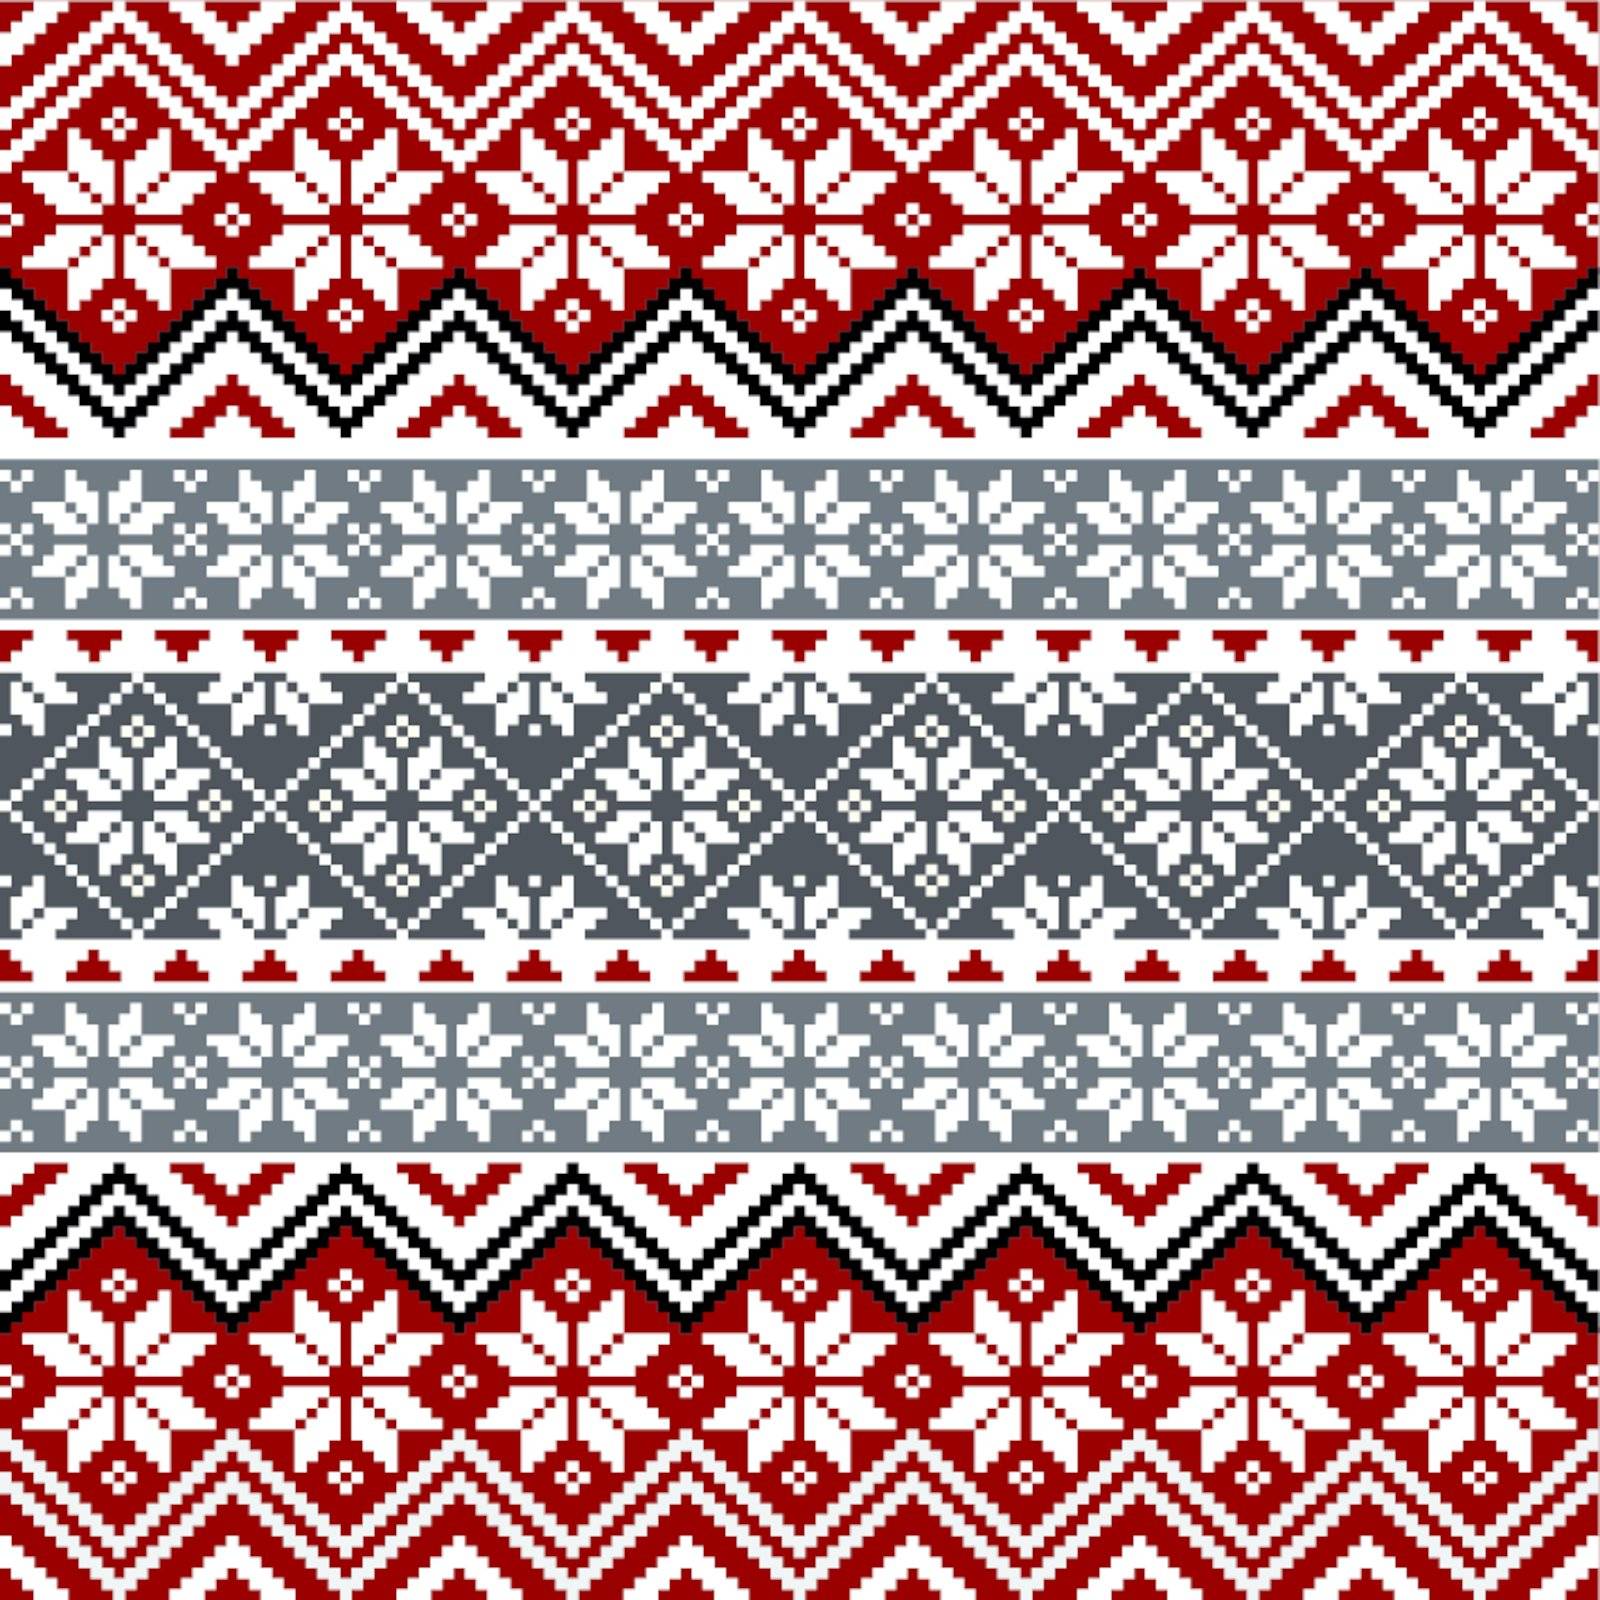 Nordic traditional pattern with snowflakes, white, grey and red design, full scalable vector graphic, all elements are grouped for easy editing